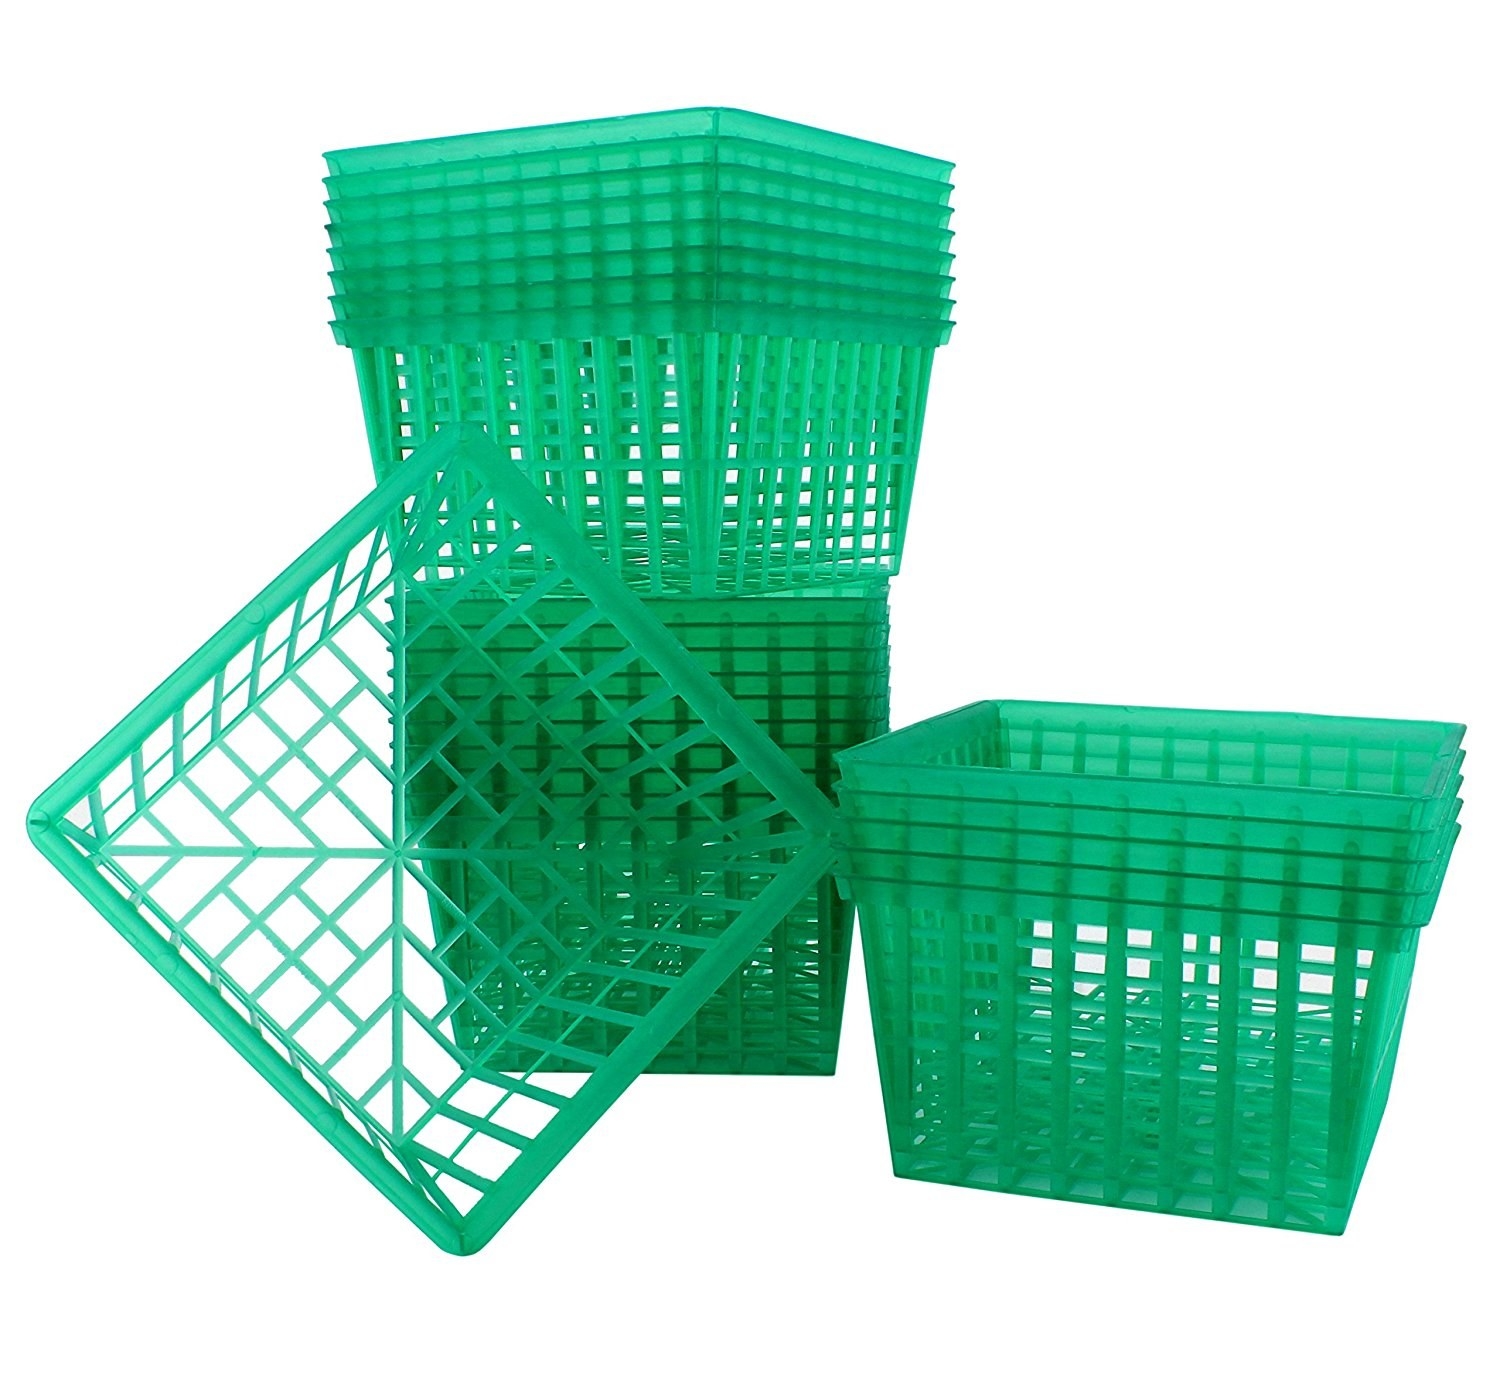 Plastic baskets stacked on top of each other